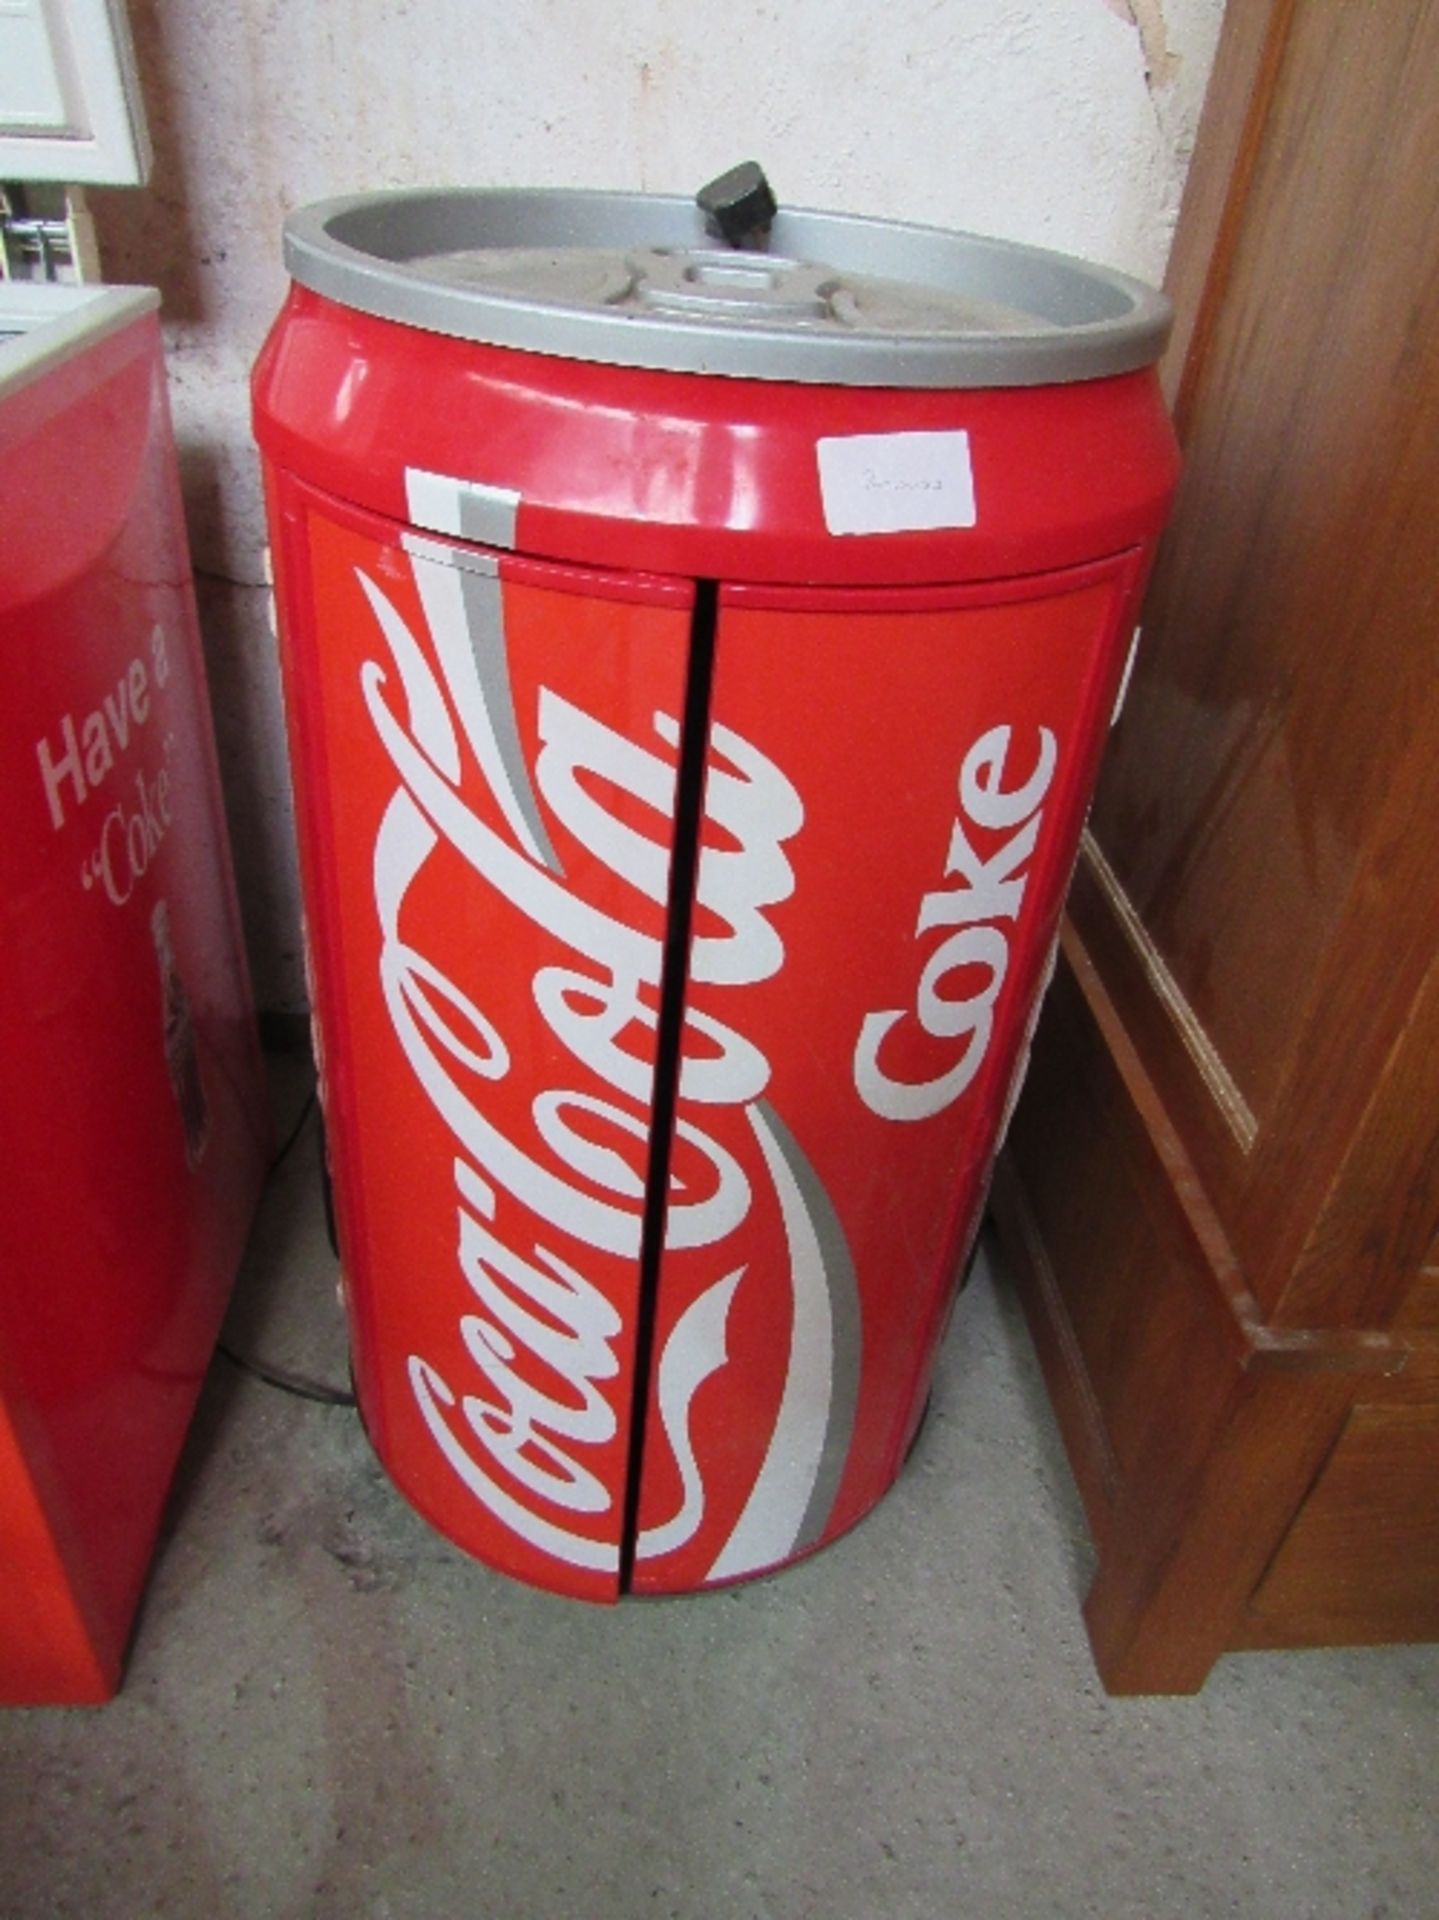 Music centre in the form of a coke can